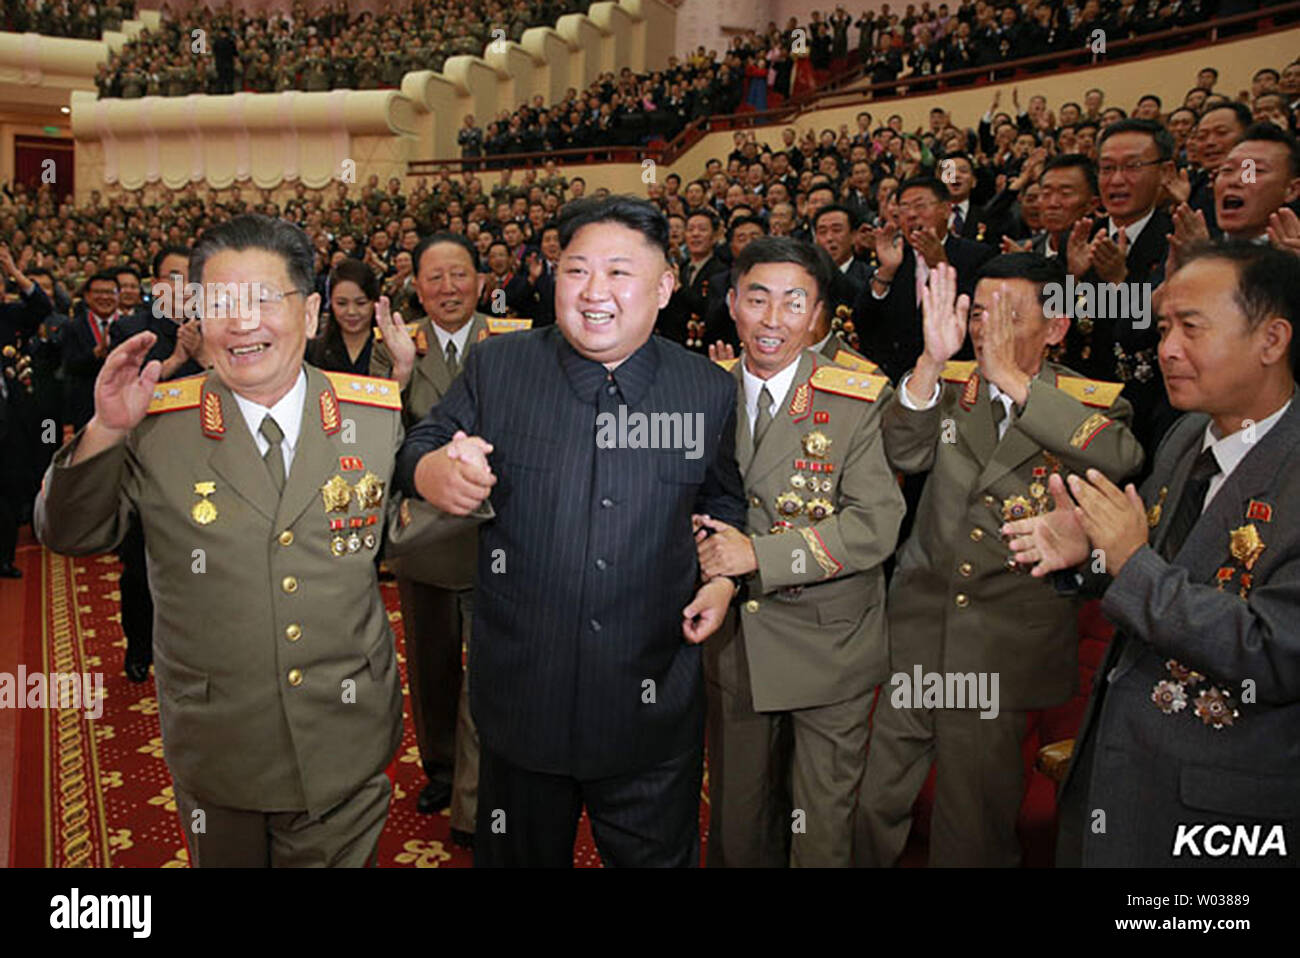 North Korean leader Kim Jong Un, accompanied by his wife, Ri Sol-Ju, hosted a lavish gala at the People's Theatre in Pyongyang on September 10, 2017, to celebrate last week's 'perfect success in the H-bomb test.' The evening's festivities began with a rendering of the National Anthem before performing 'Glory to General Kim Jong Un,' 'The Glorious Motherland,' and other traditional songs. Photo by KCNA/UPI Stock Photo